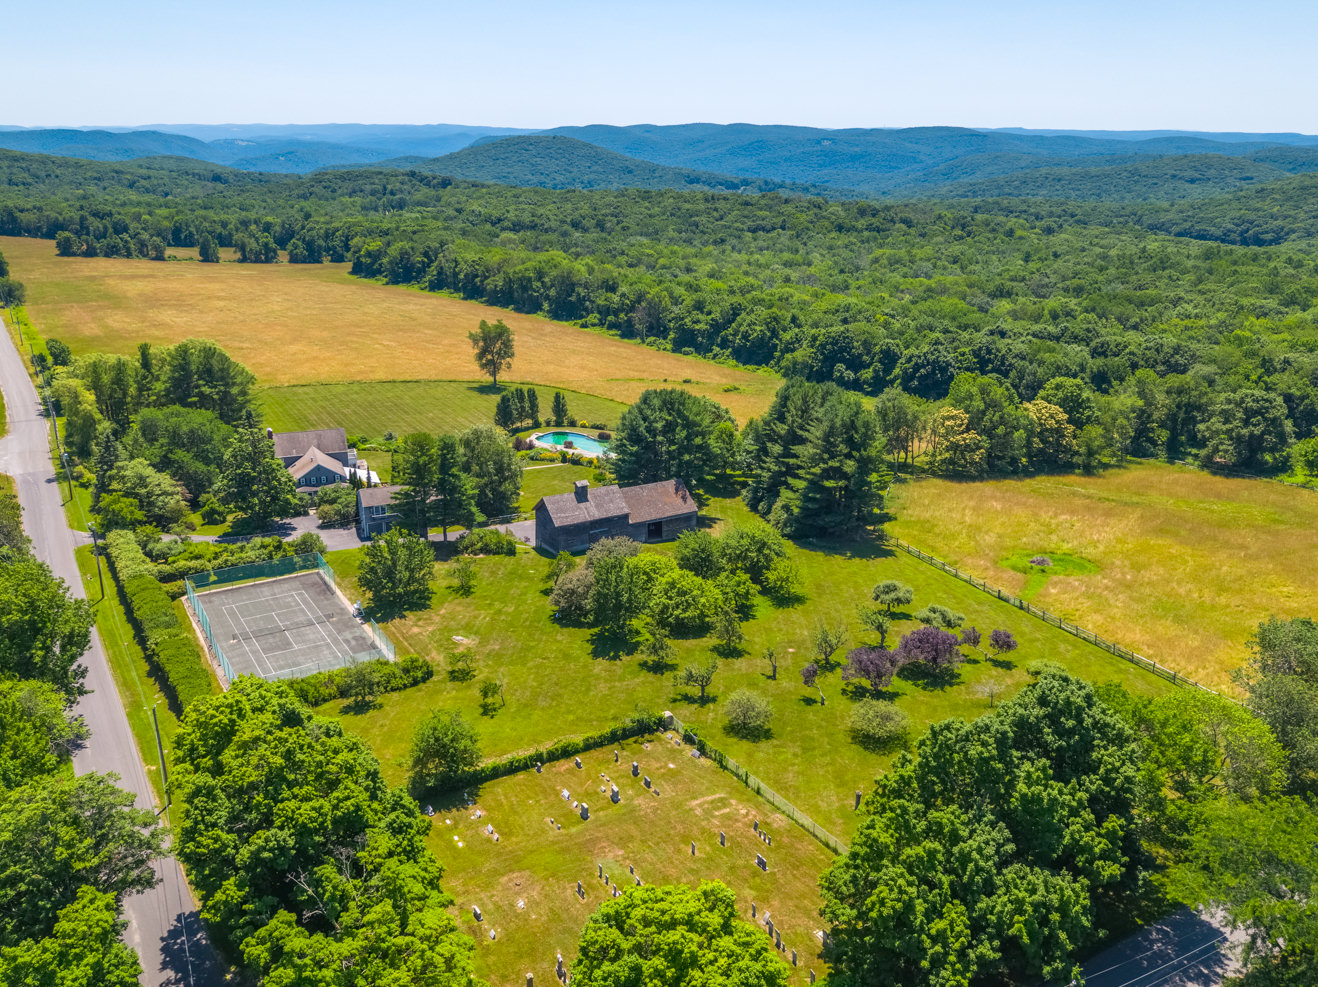 Real Estate drone video production in Connecticut, Massachusetts, New York. Photoflight Aerial Media